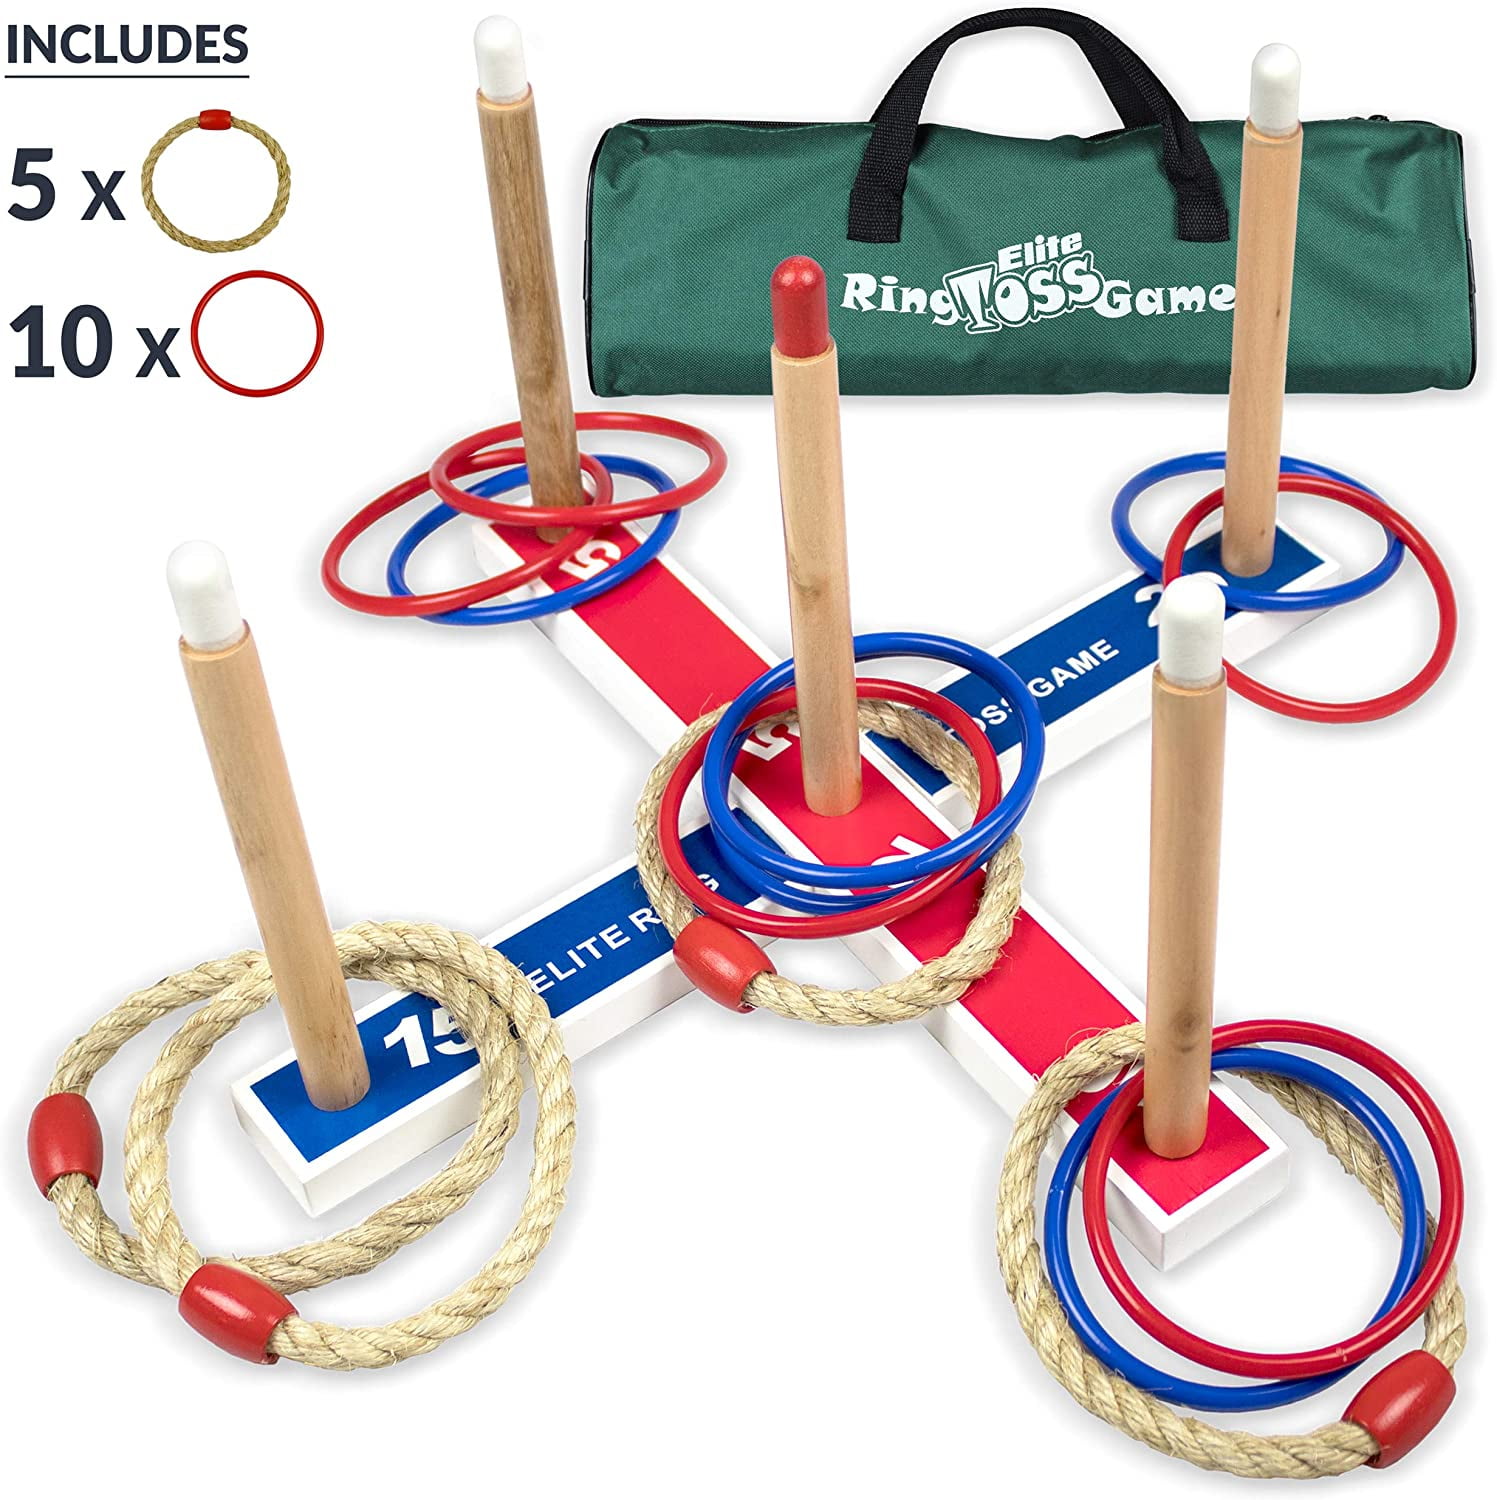 SumToy Outdoor Games For Kids - Ring Toss Yard Games for Adults and Family. Easy Backyard Games to Assemble, With Compact Carry Bag for Easy Storage. Fun Kids Games or Outdoor Toys for Kids